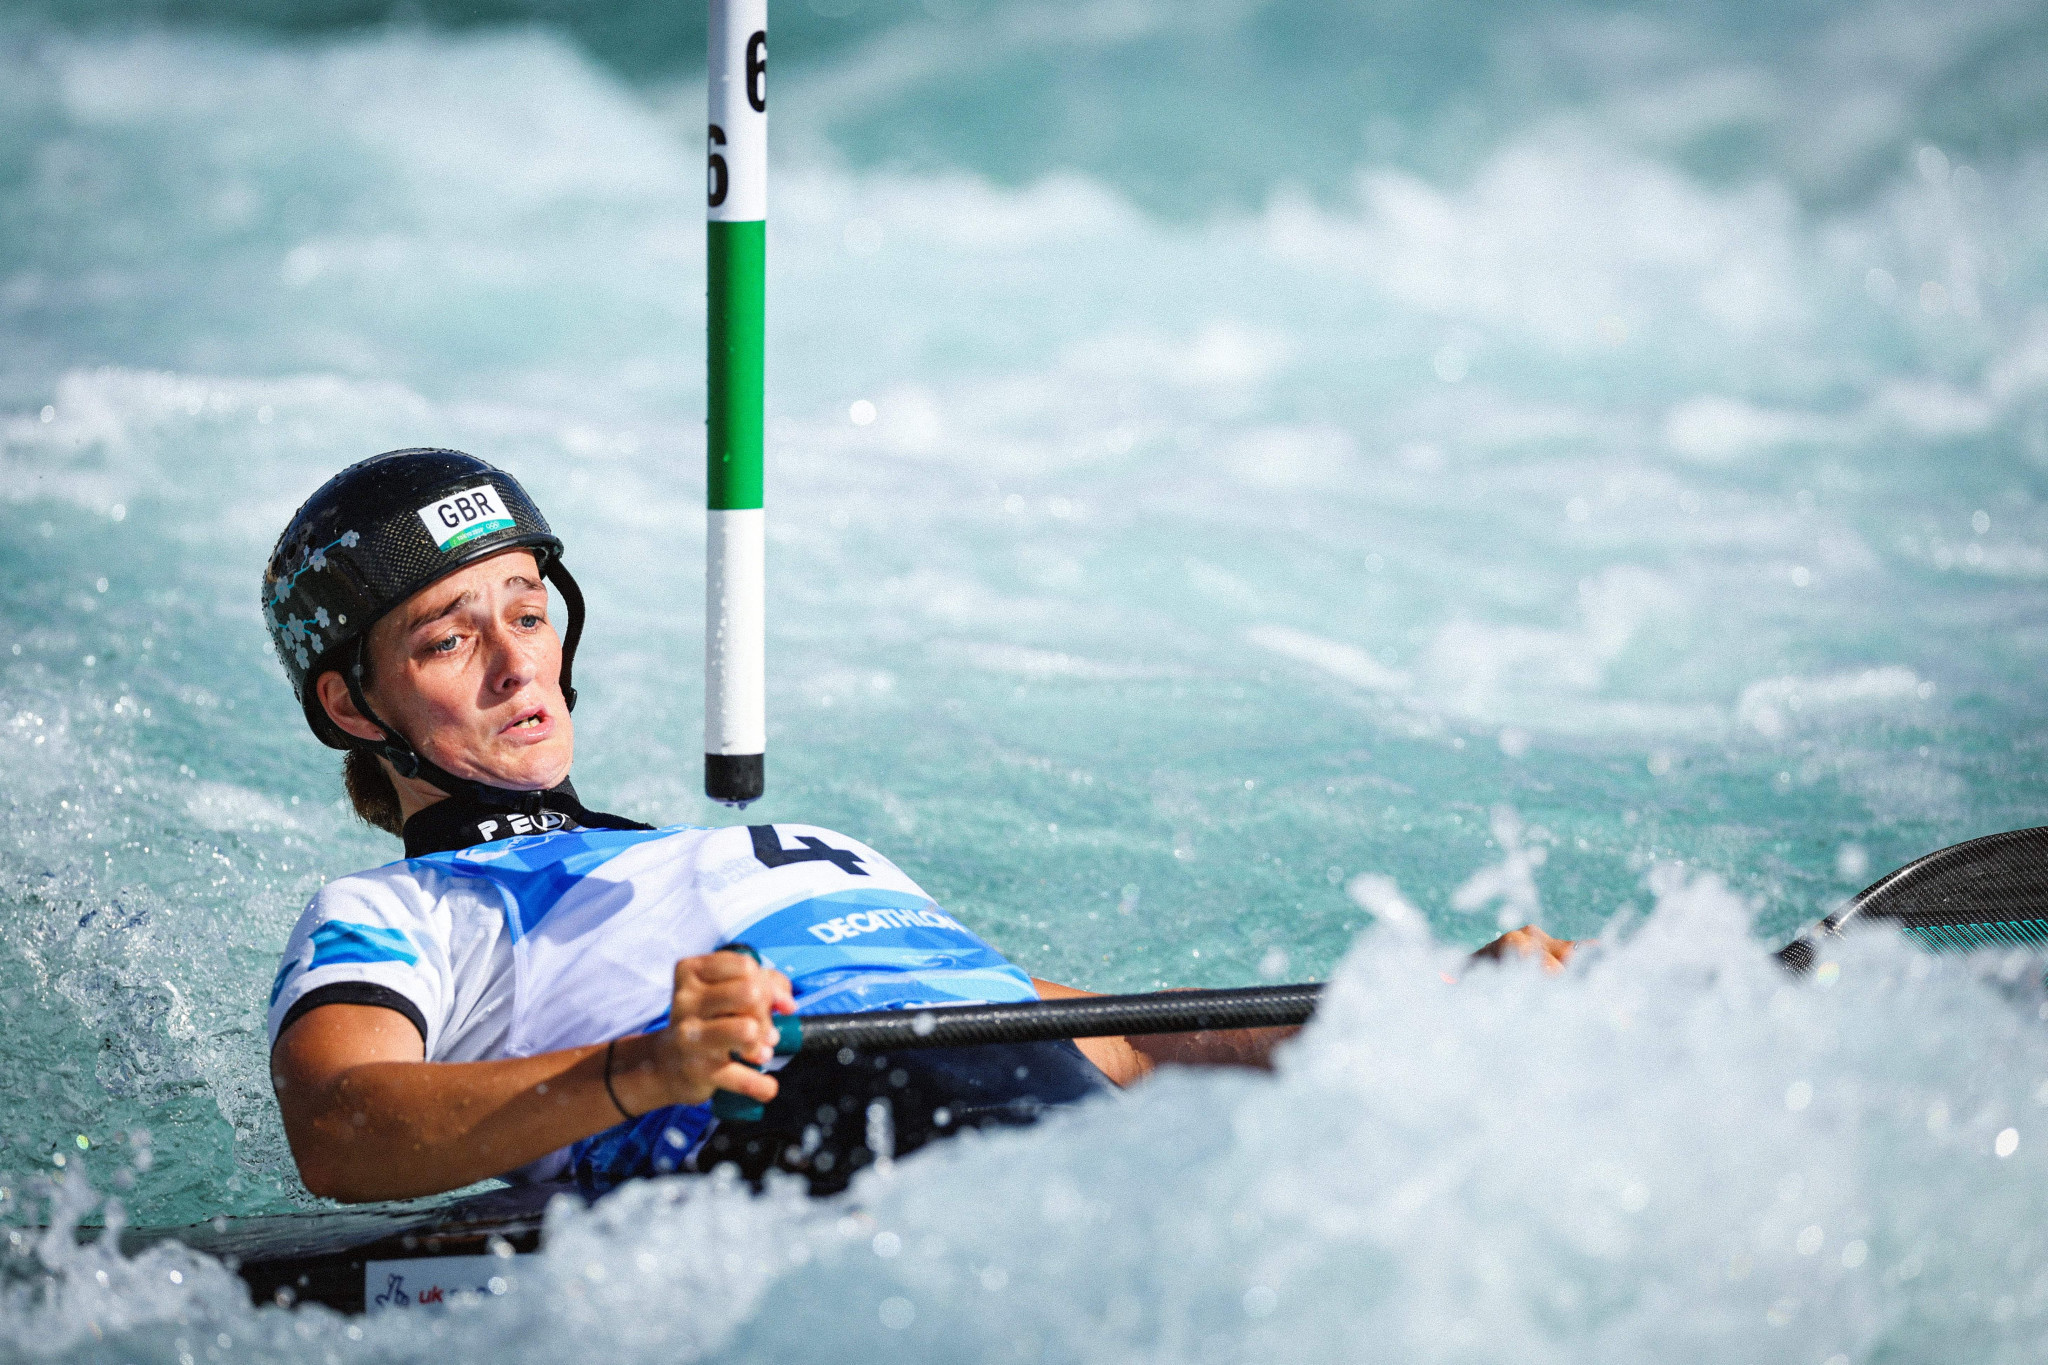 Britain's Mallory Franklin won the women's canoe gold at her home ICF Canoe Slalom World Championships ©Getty Images